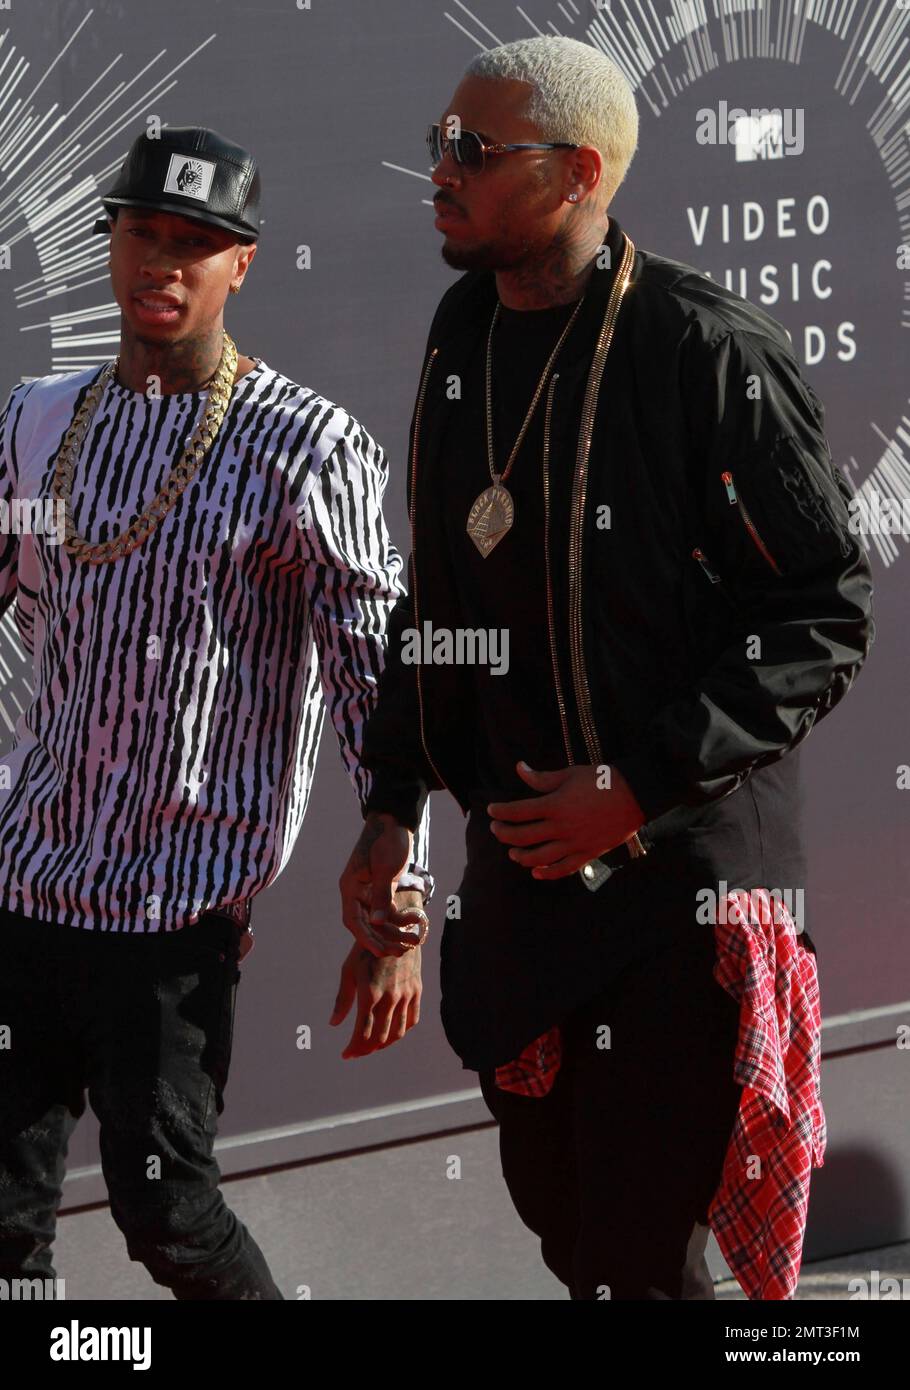 Chris Brown at the MTV Video Music Awards at the Forum in Los Angeles, CA.  24th August, 2014. Stock Photo